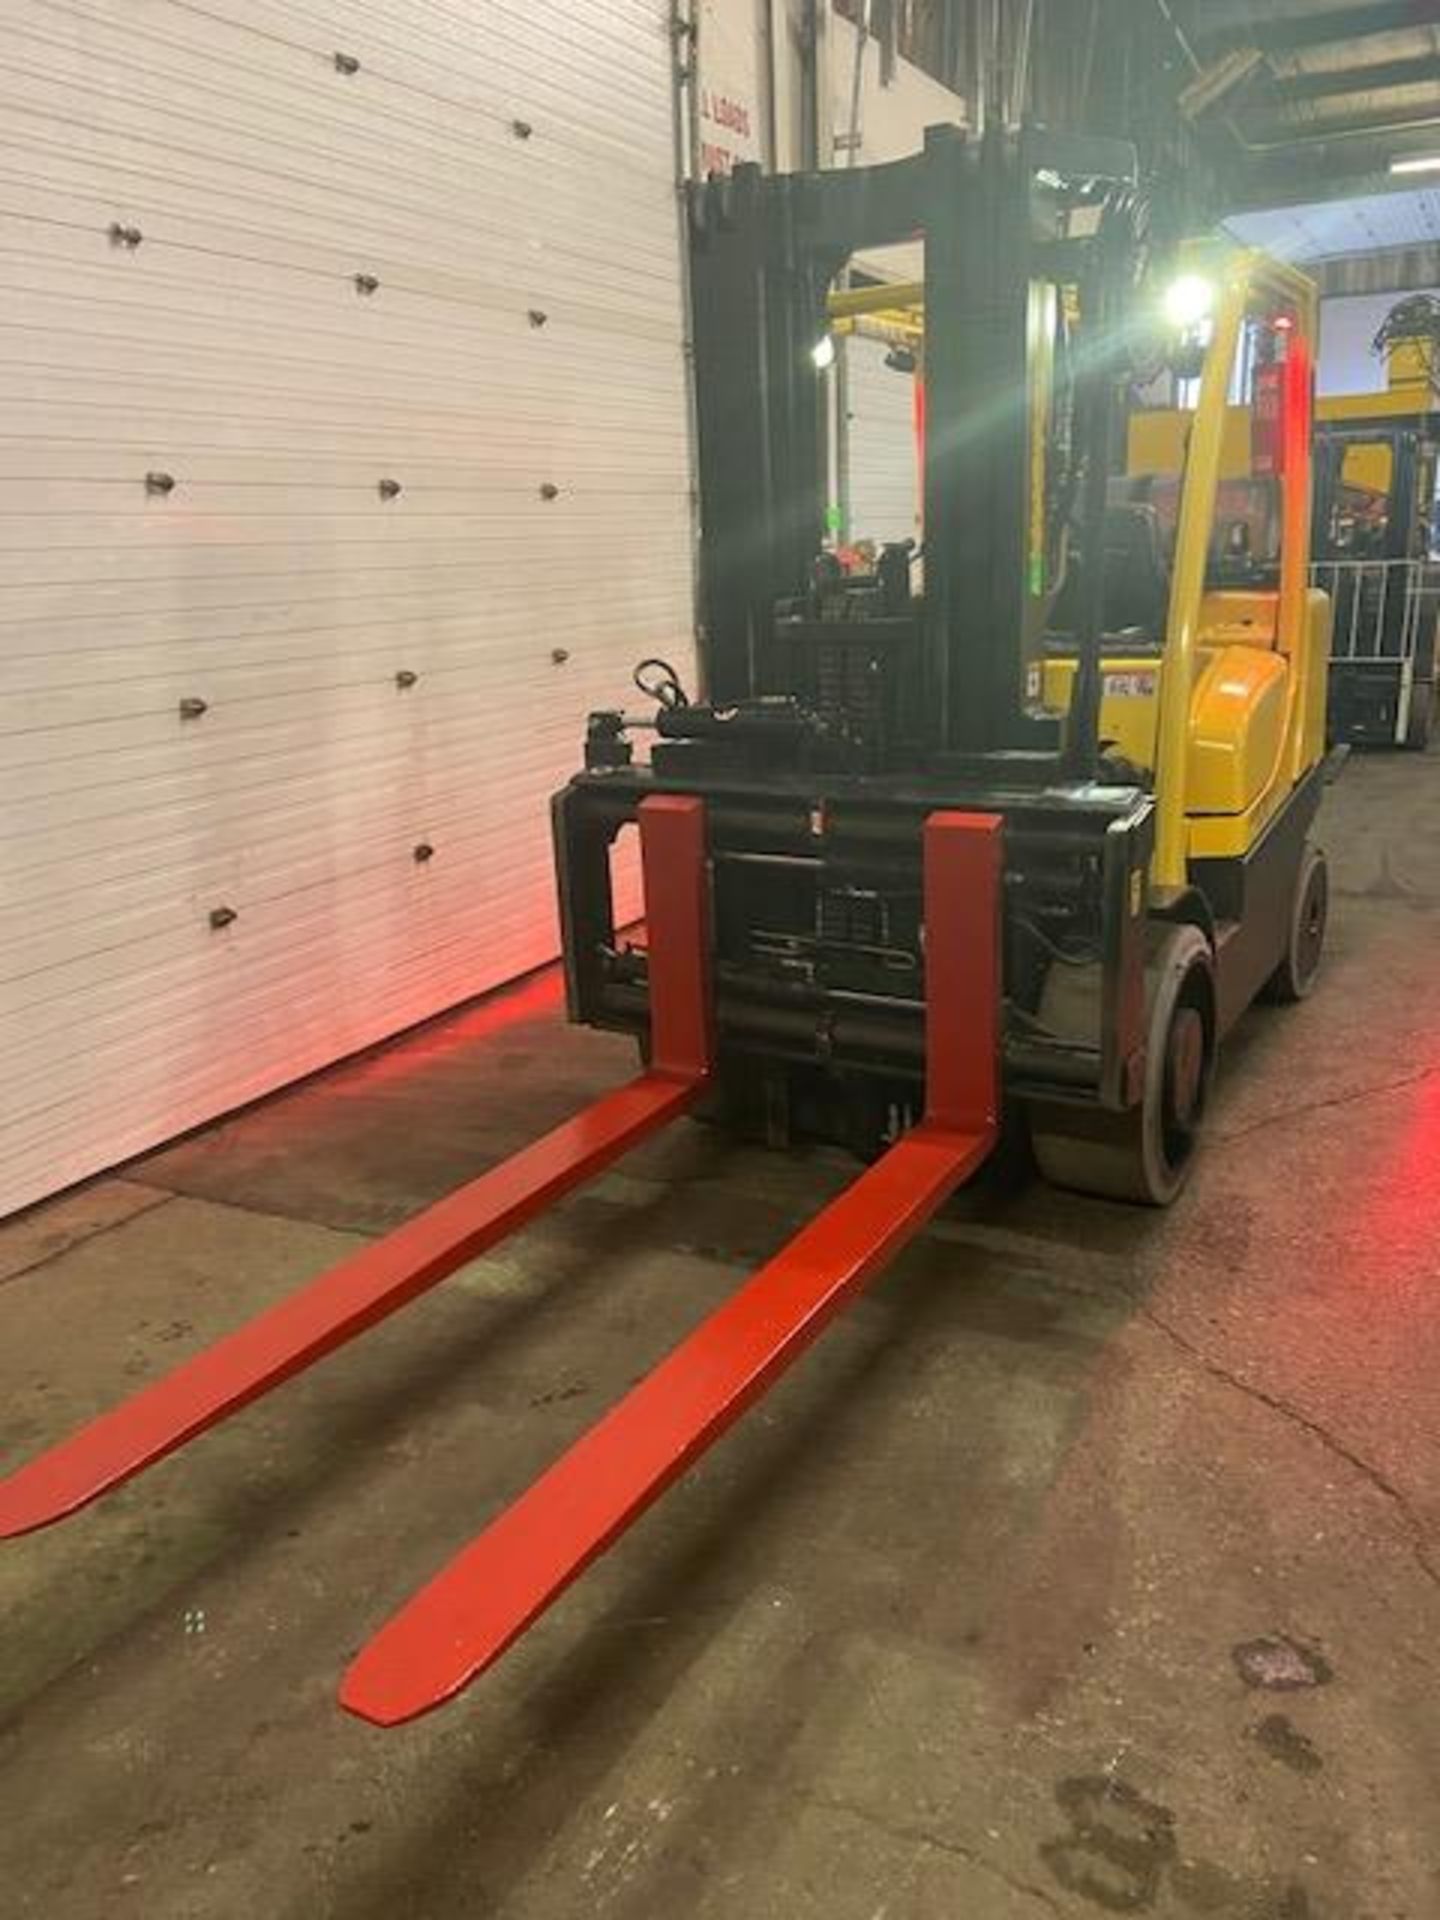 FREE CUSTOMS - MINT 2016 Hyster 15,500lbs Capacity Forklift S155FT LPG (propane) with sideshift w FP - Image 2 of 4